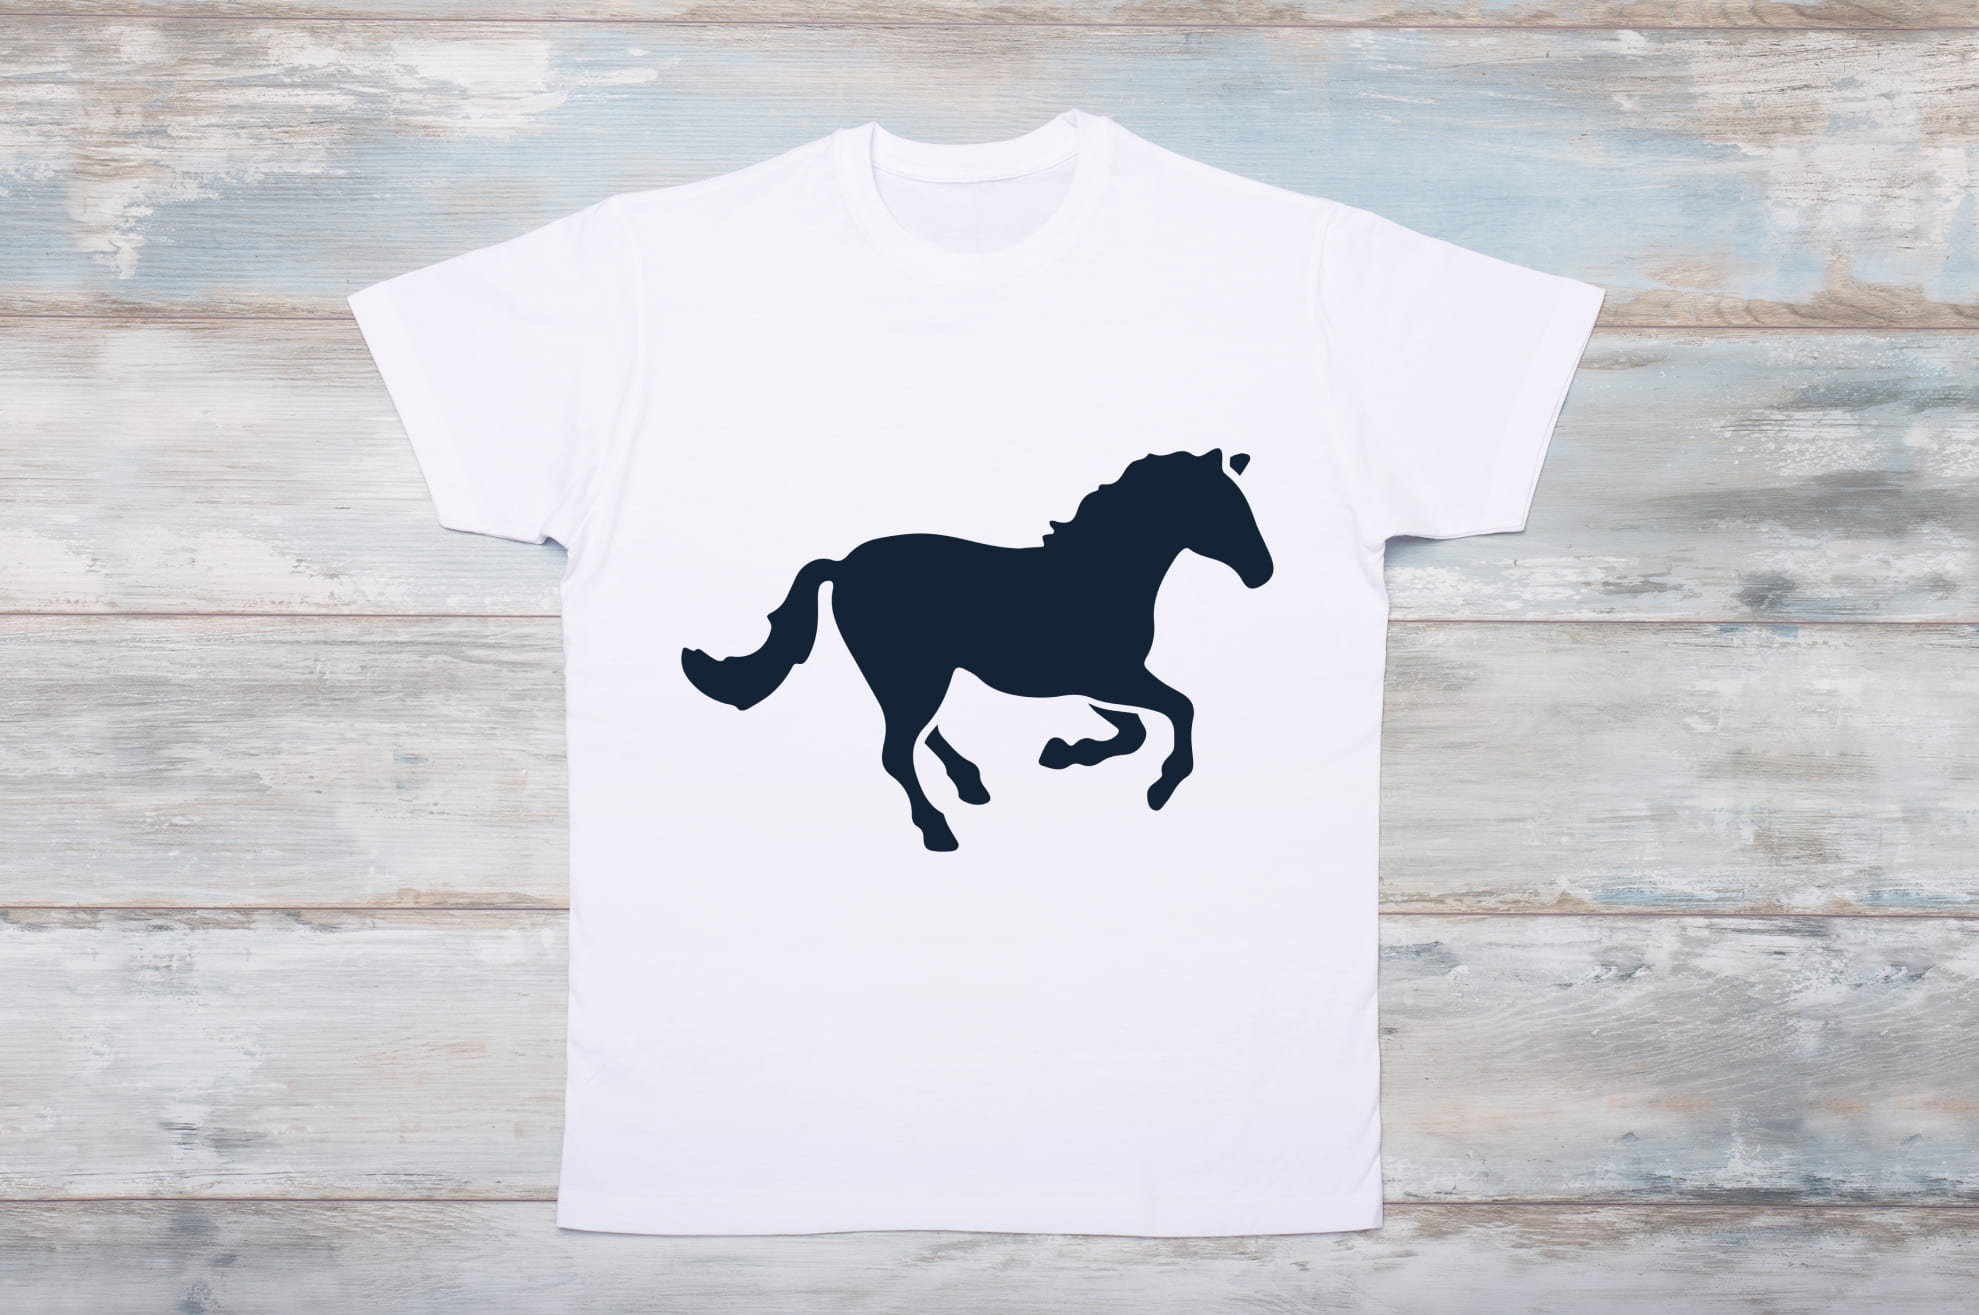 White t-shirt with a black silhouette of a running horse on the wooden background.